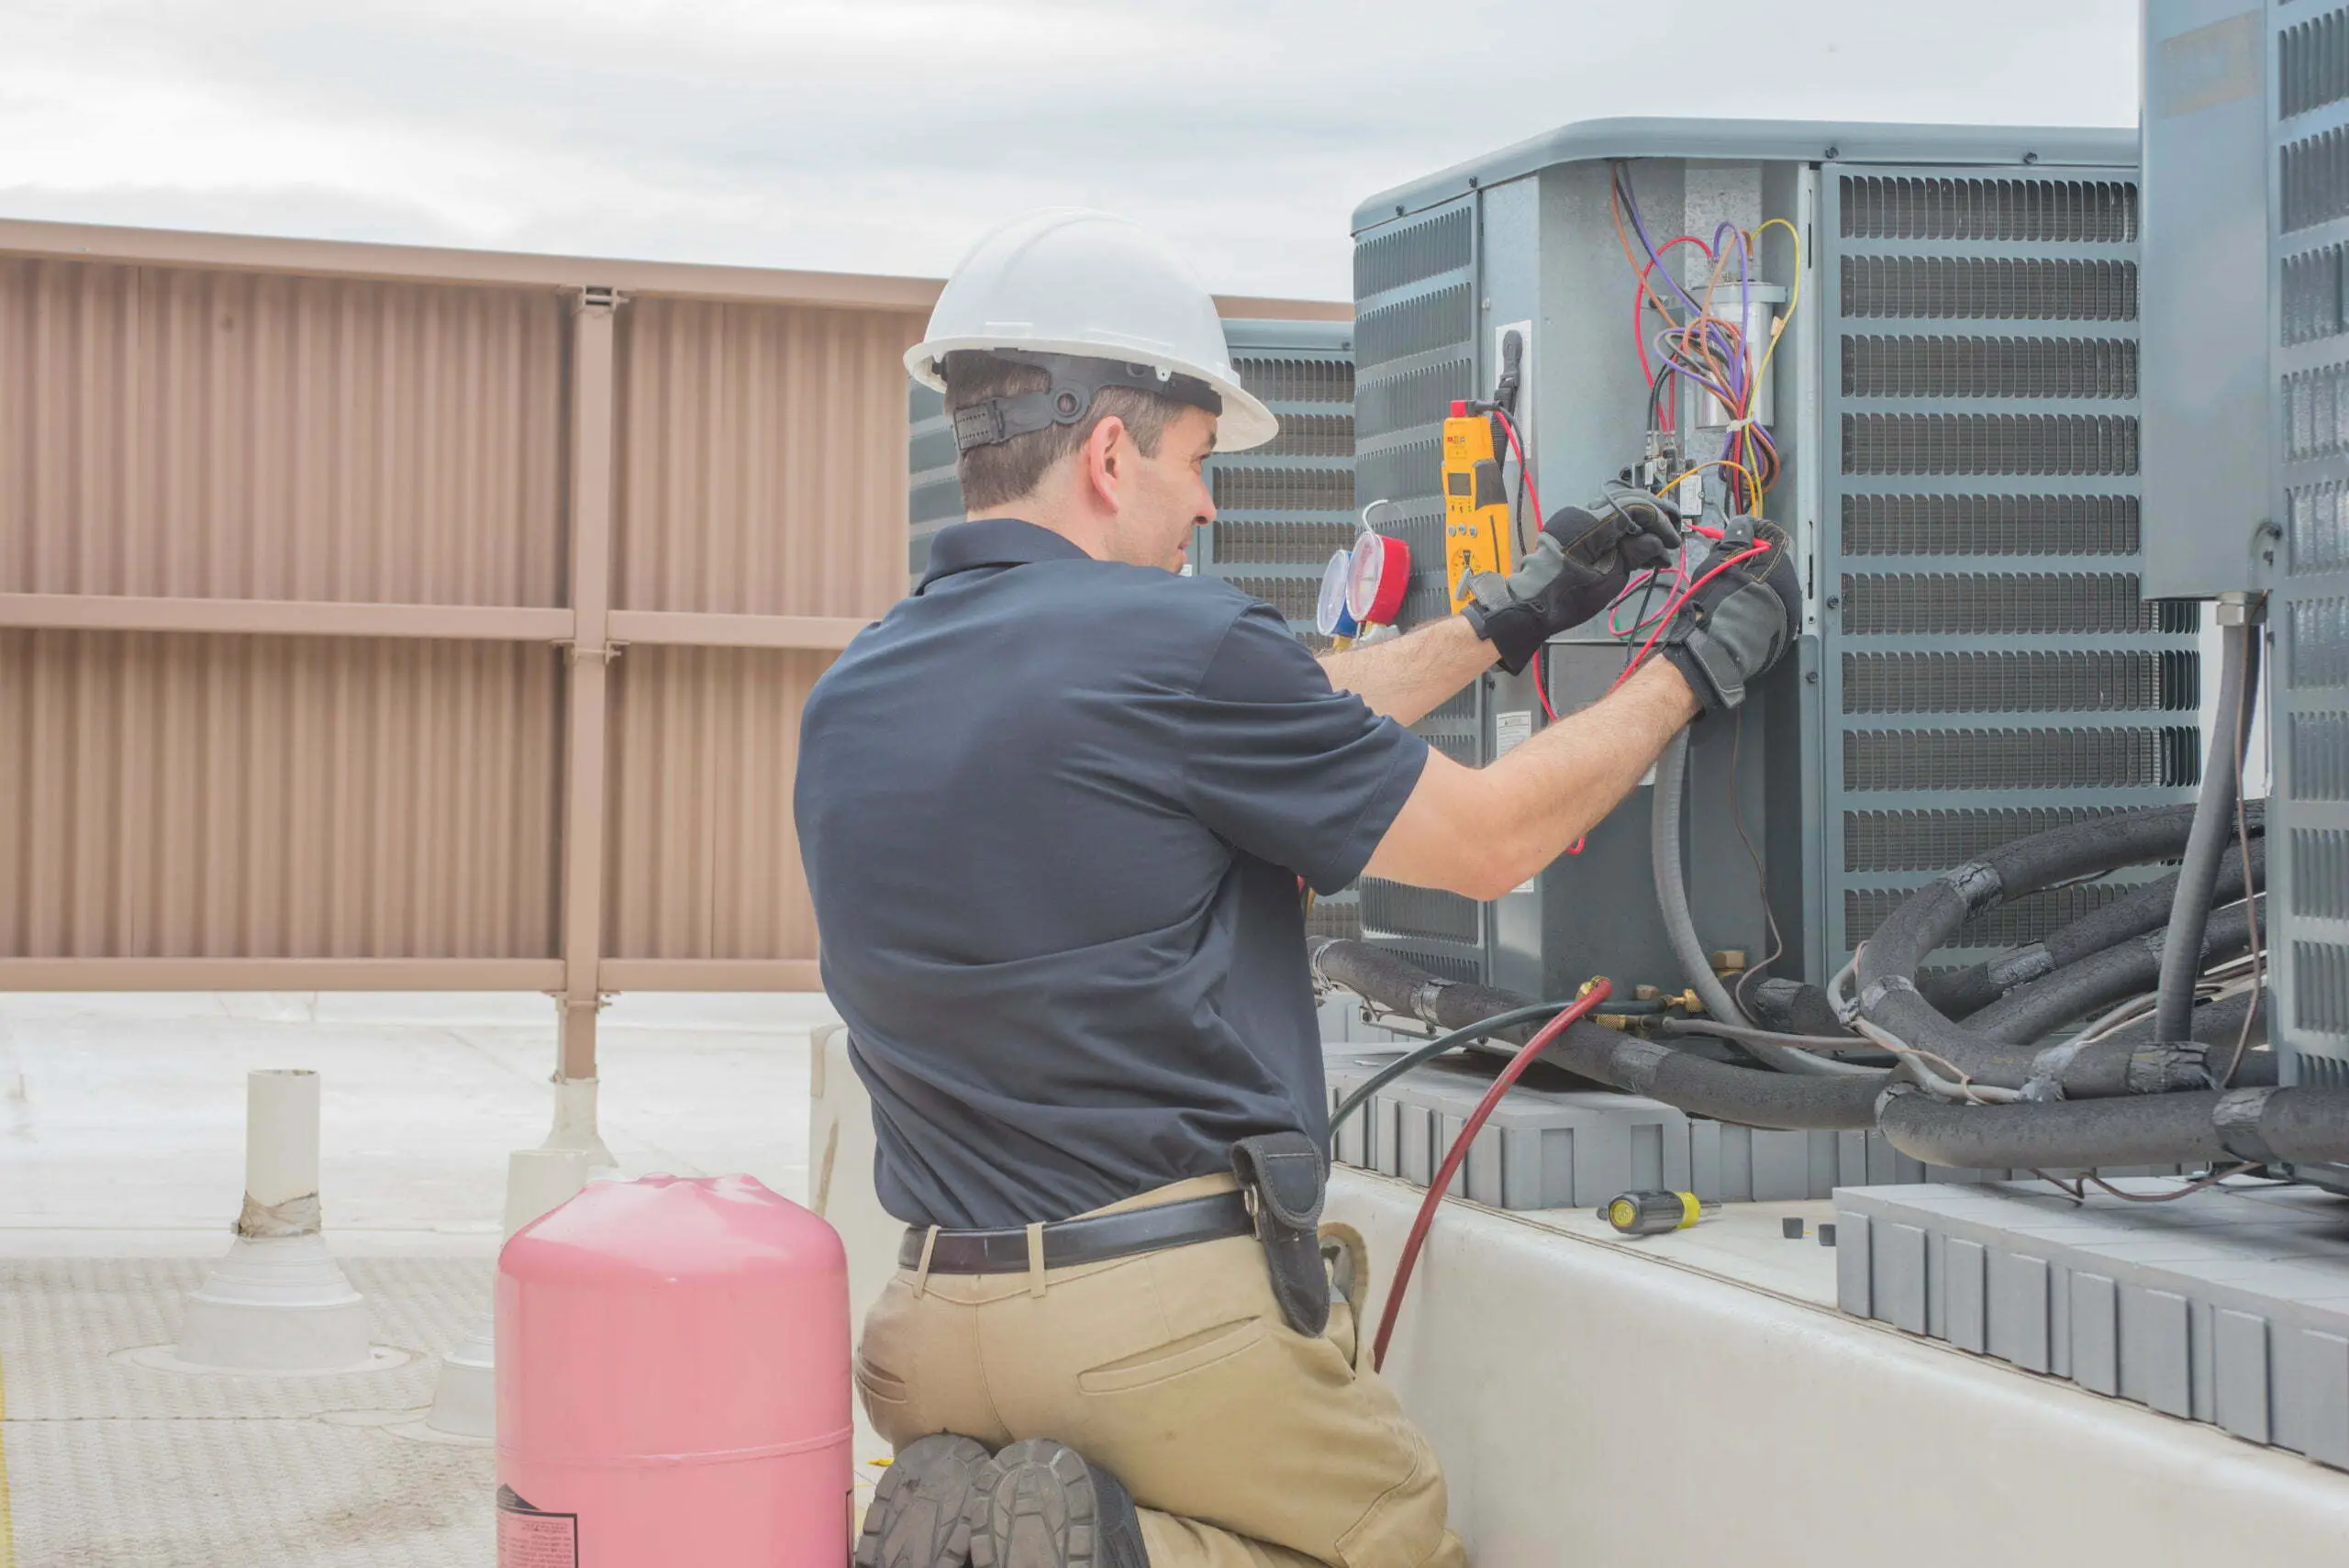 How To Become An Hvac Technician The Definitive Guide Careers Education